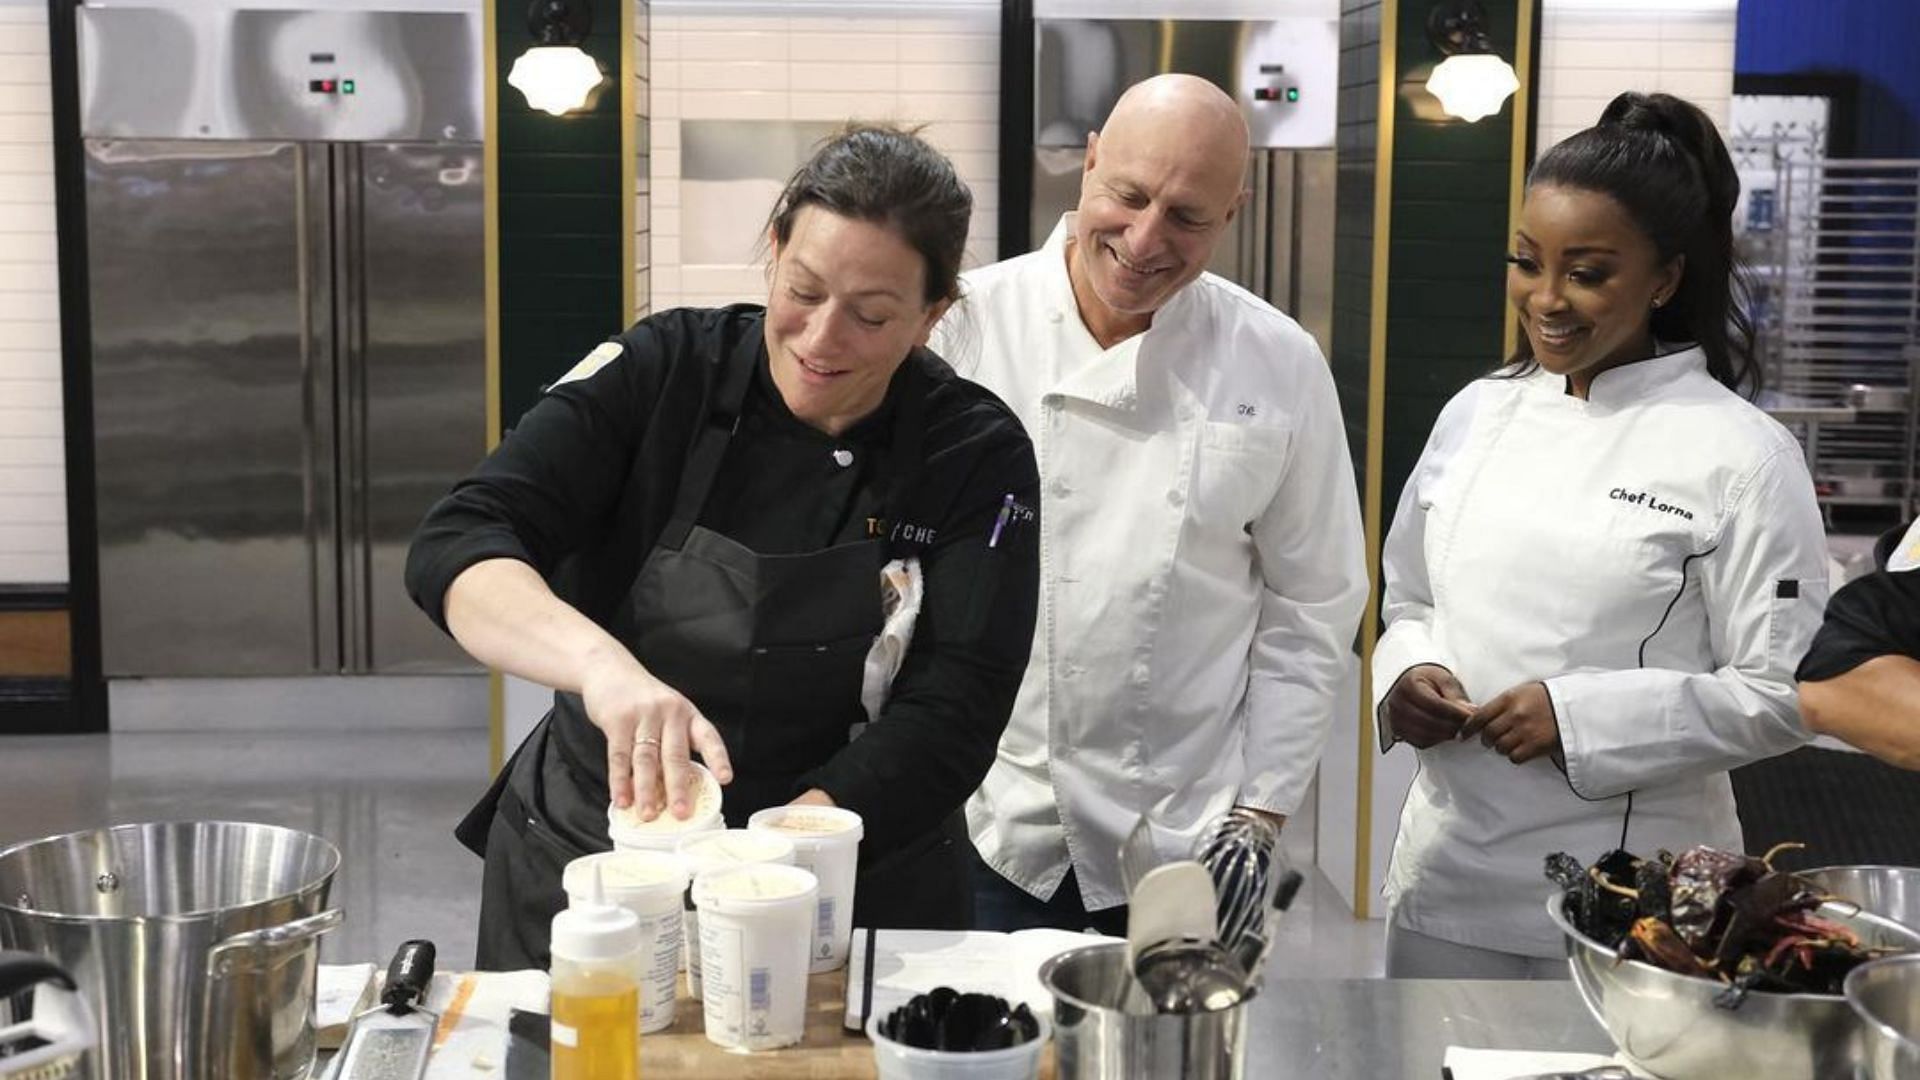 Contestants face interesting challenges on Top Chef season 20